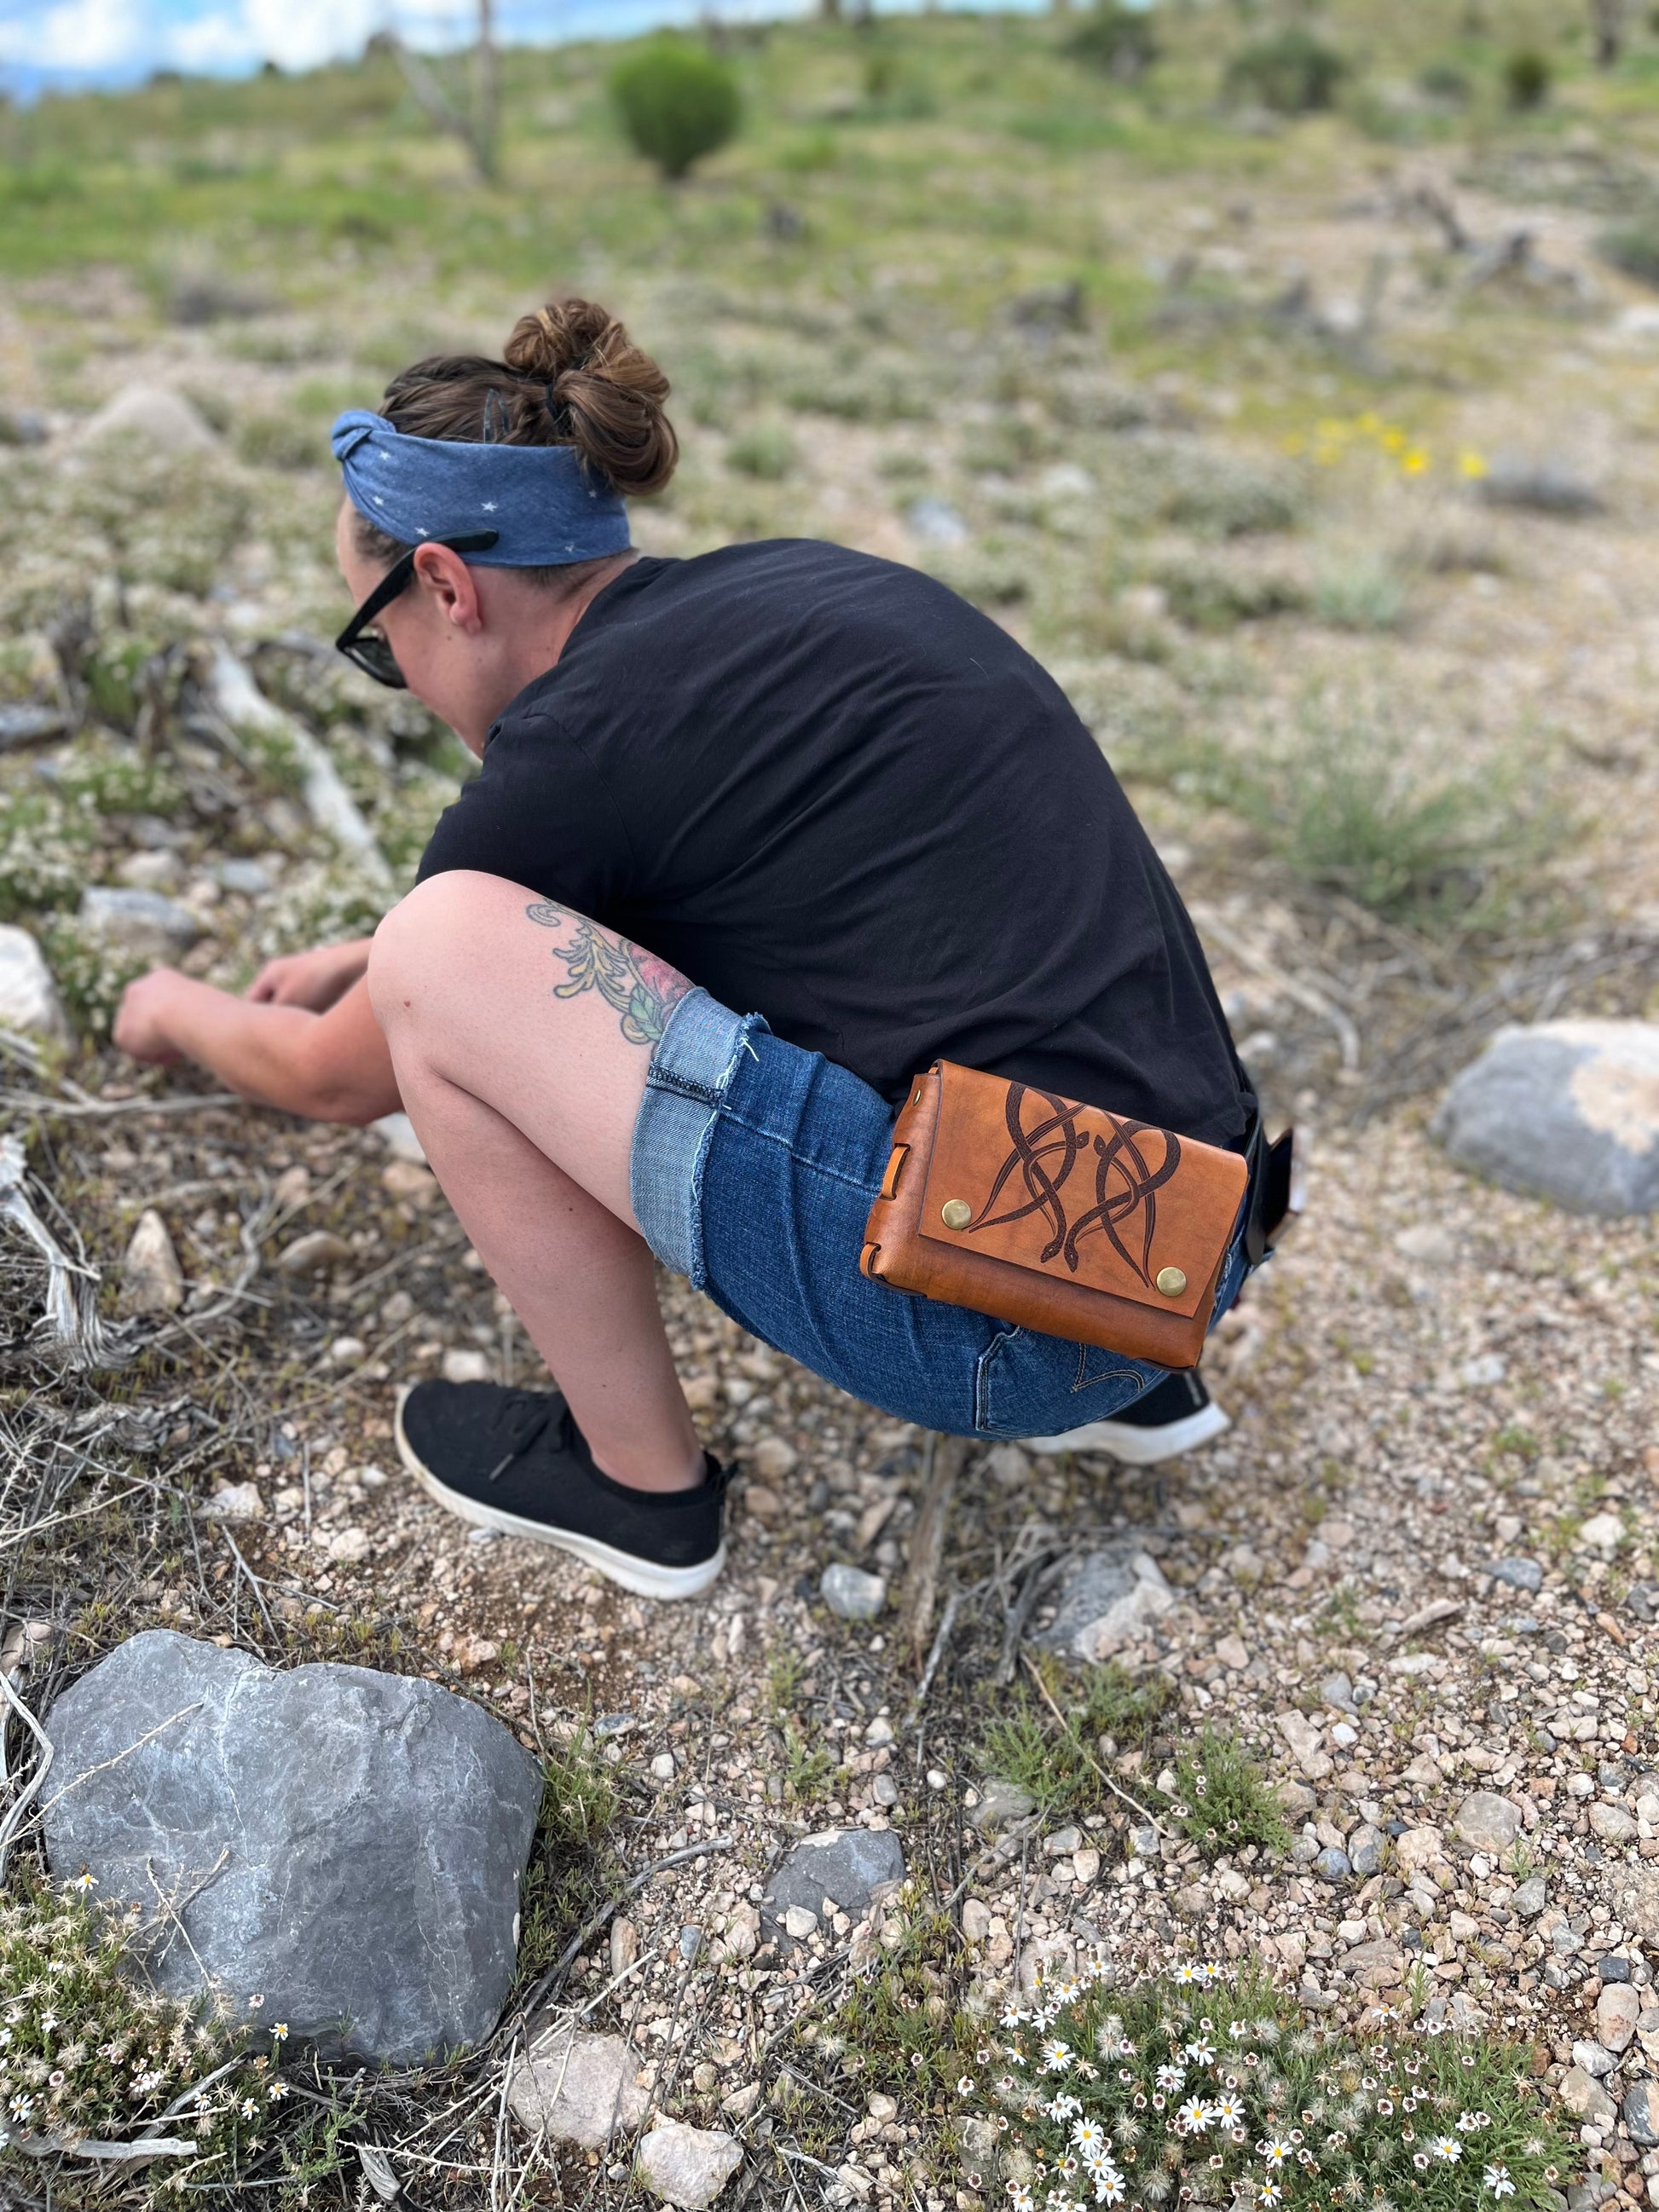 By using the snaps on the belt clip you can attach and remove your bag. Without out taking your belt off! These bags are versitile and give you options for where ever life takes you. 